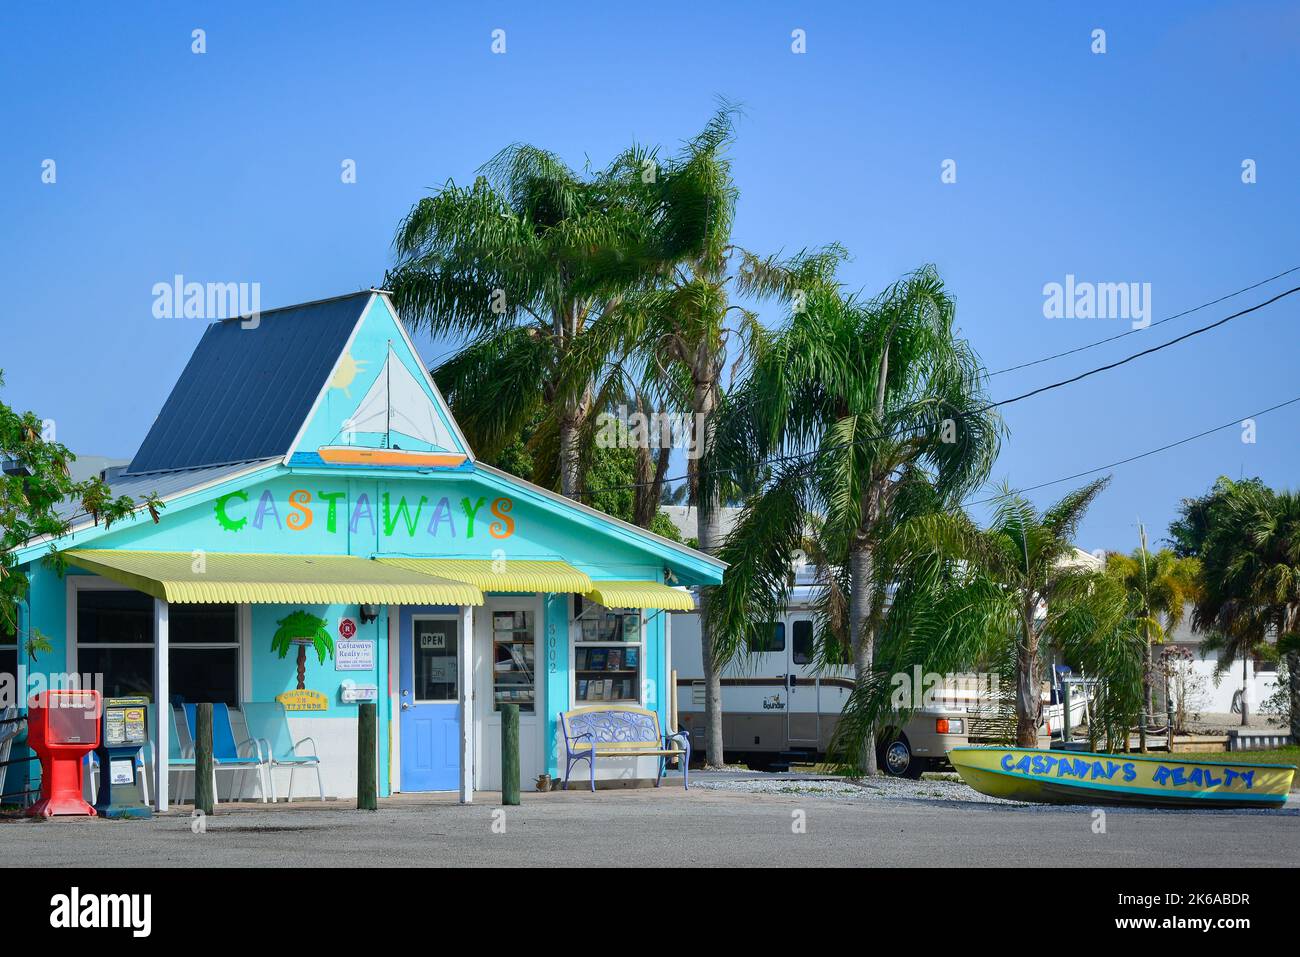 A charming little building in colorful pastels houses the Castaways Realty business with boat parked out front in St. James City, Pine Island, FL, USA Stock Photo